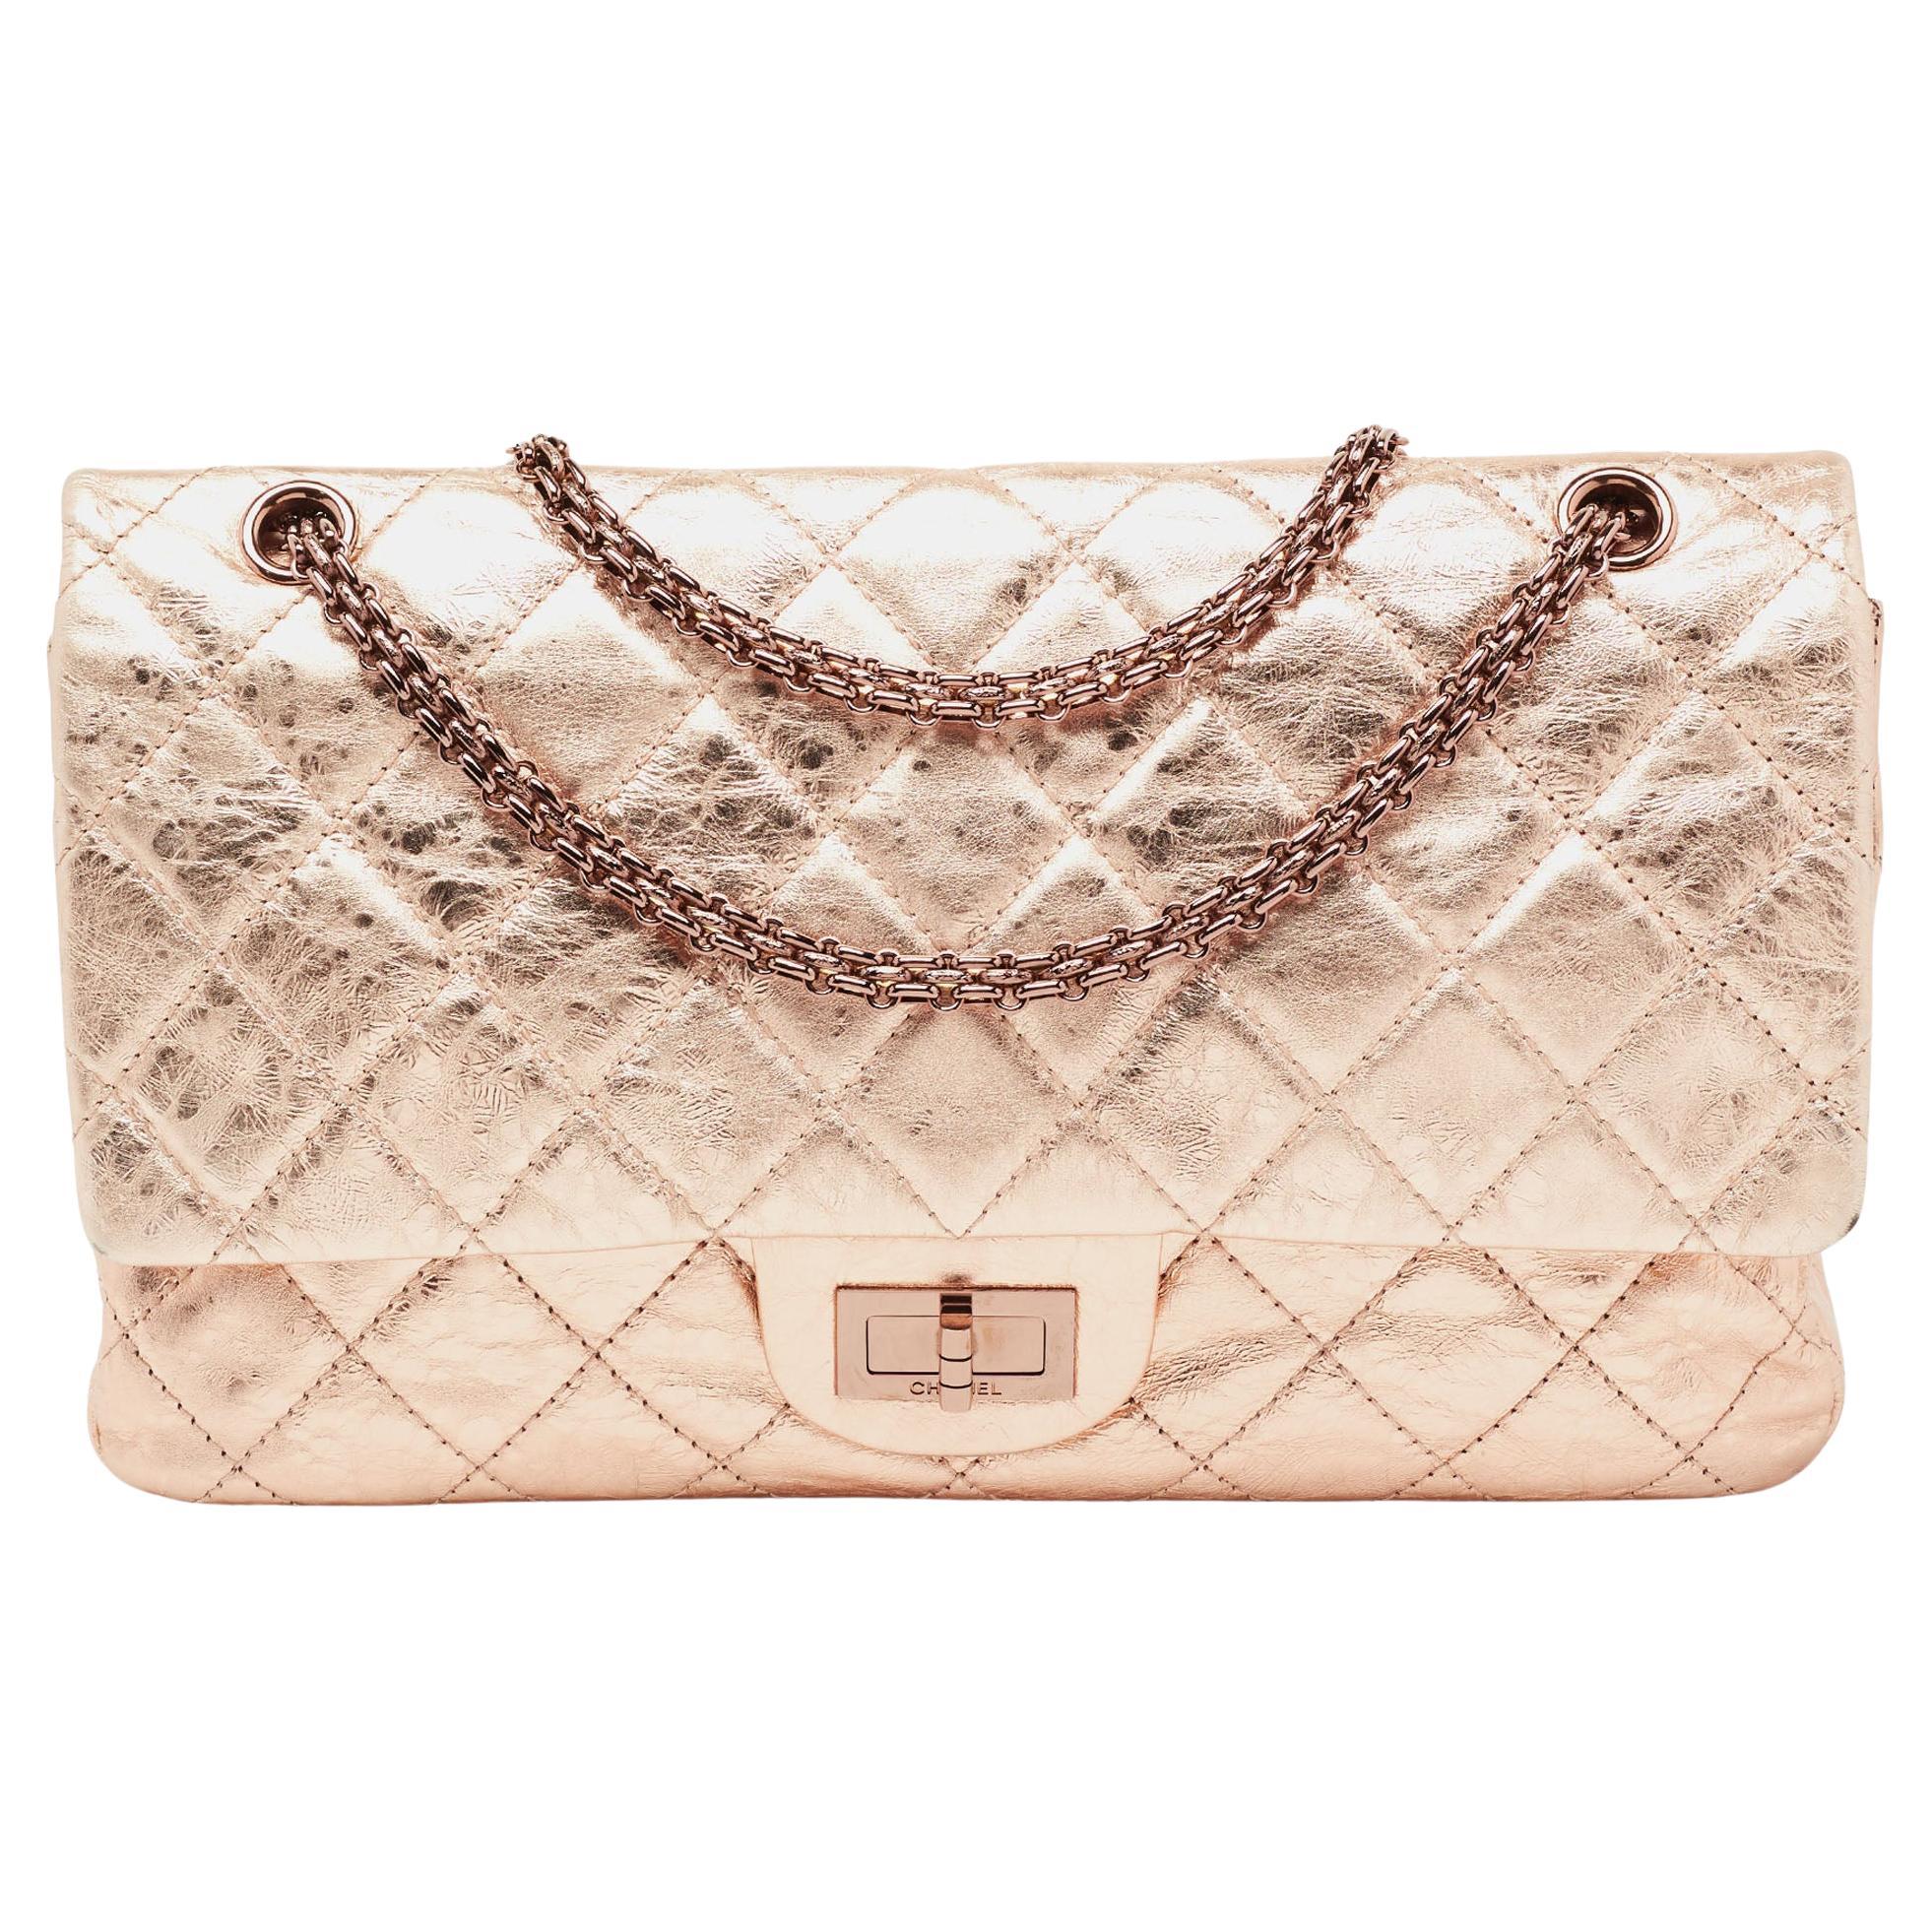 Chanel Metallic Gold Crinkled Quilted Leather Mini Reissue 2.55